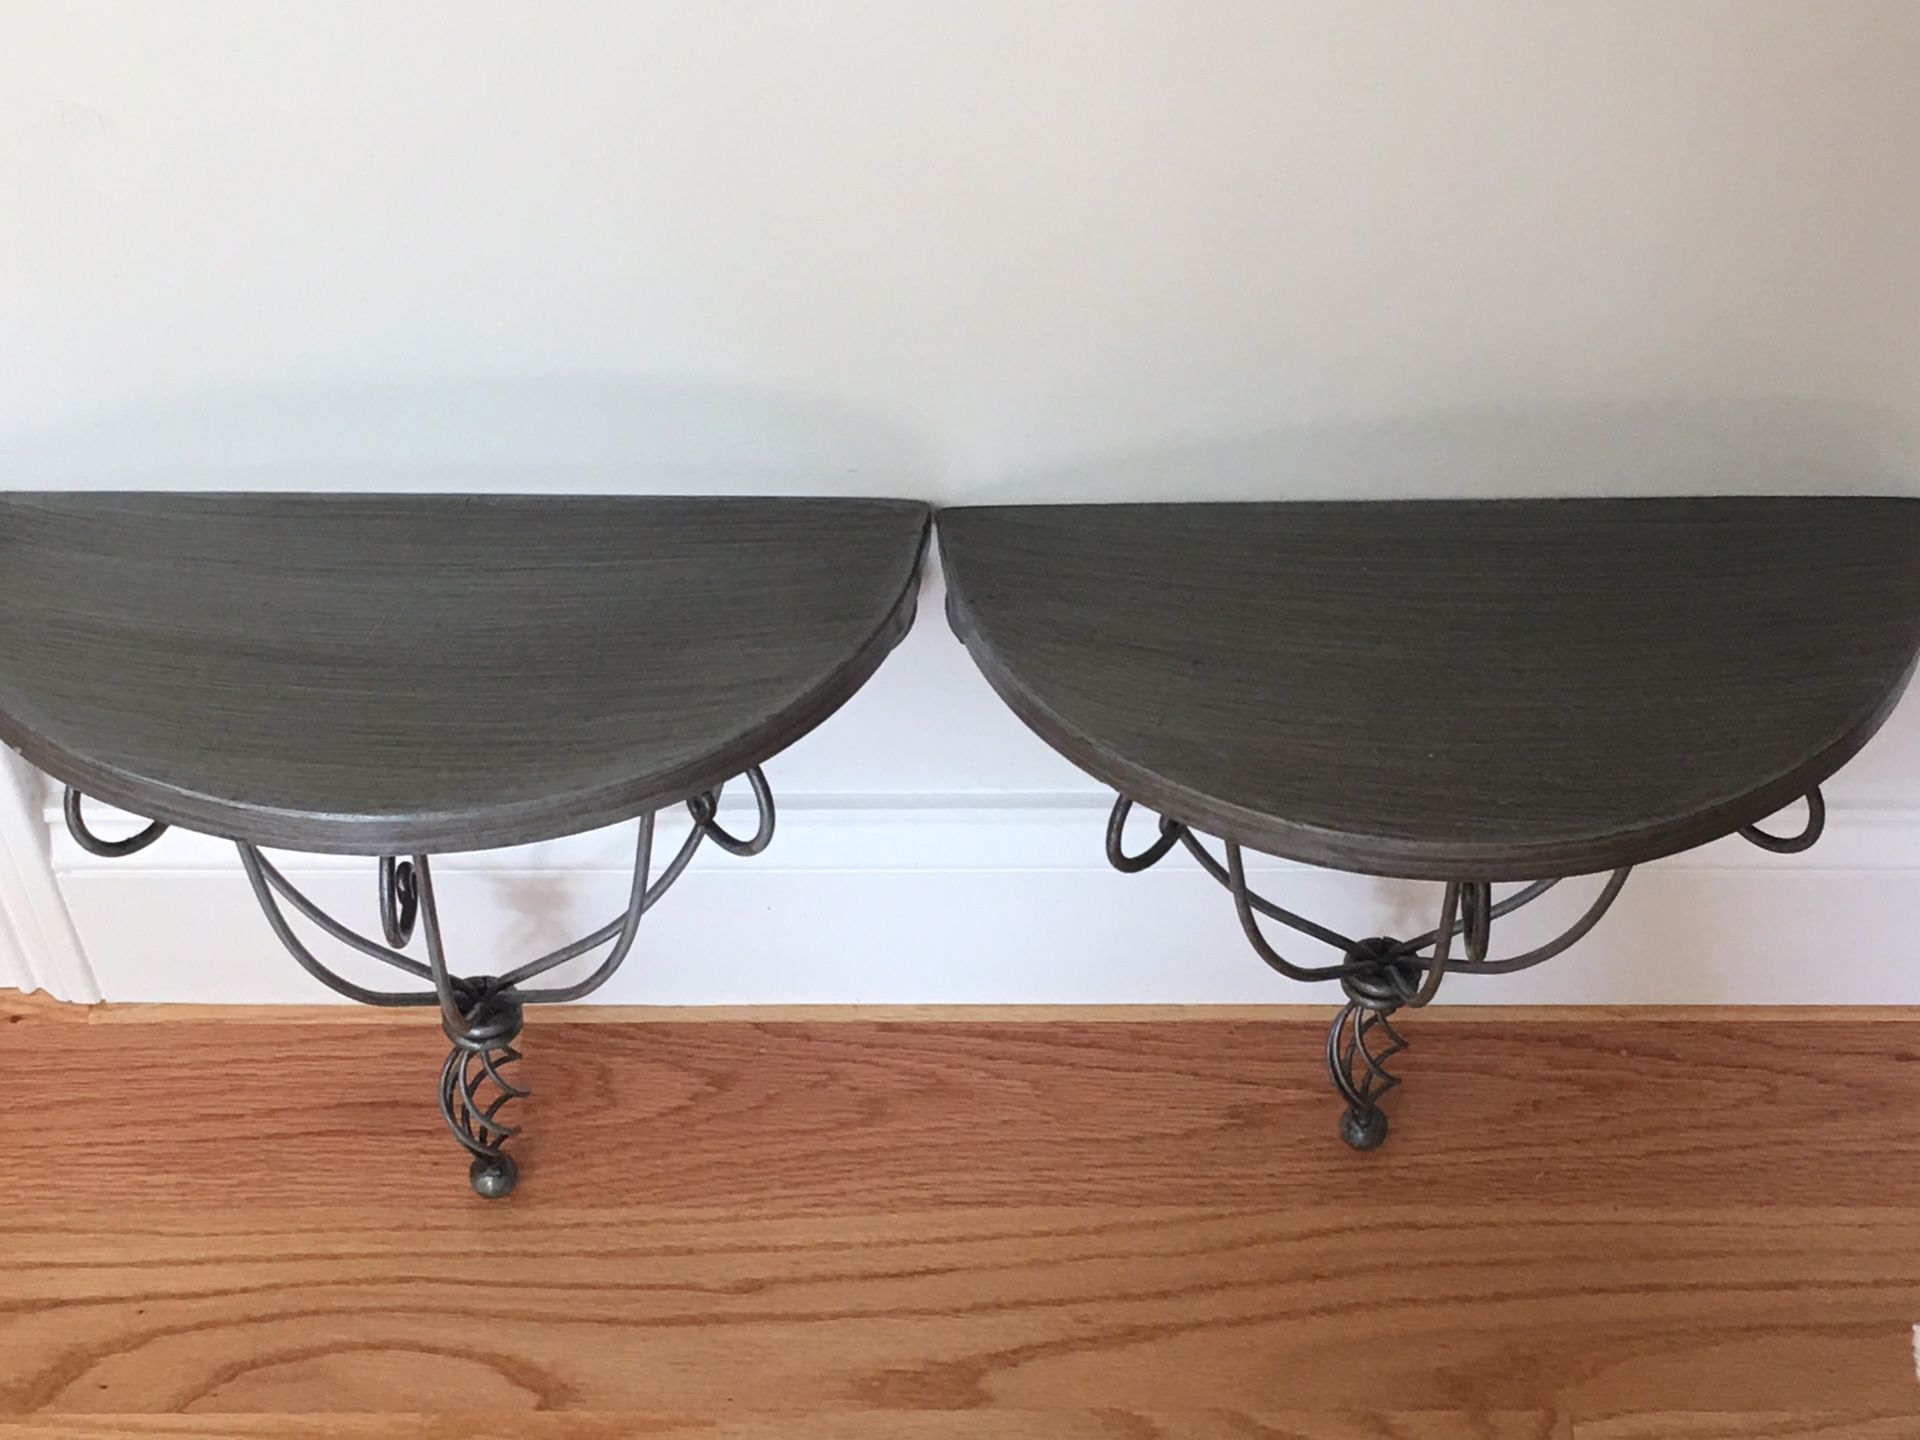 Bird cage twist Iron wall shelves. $30 for Both